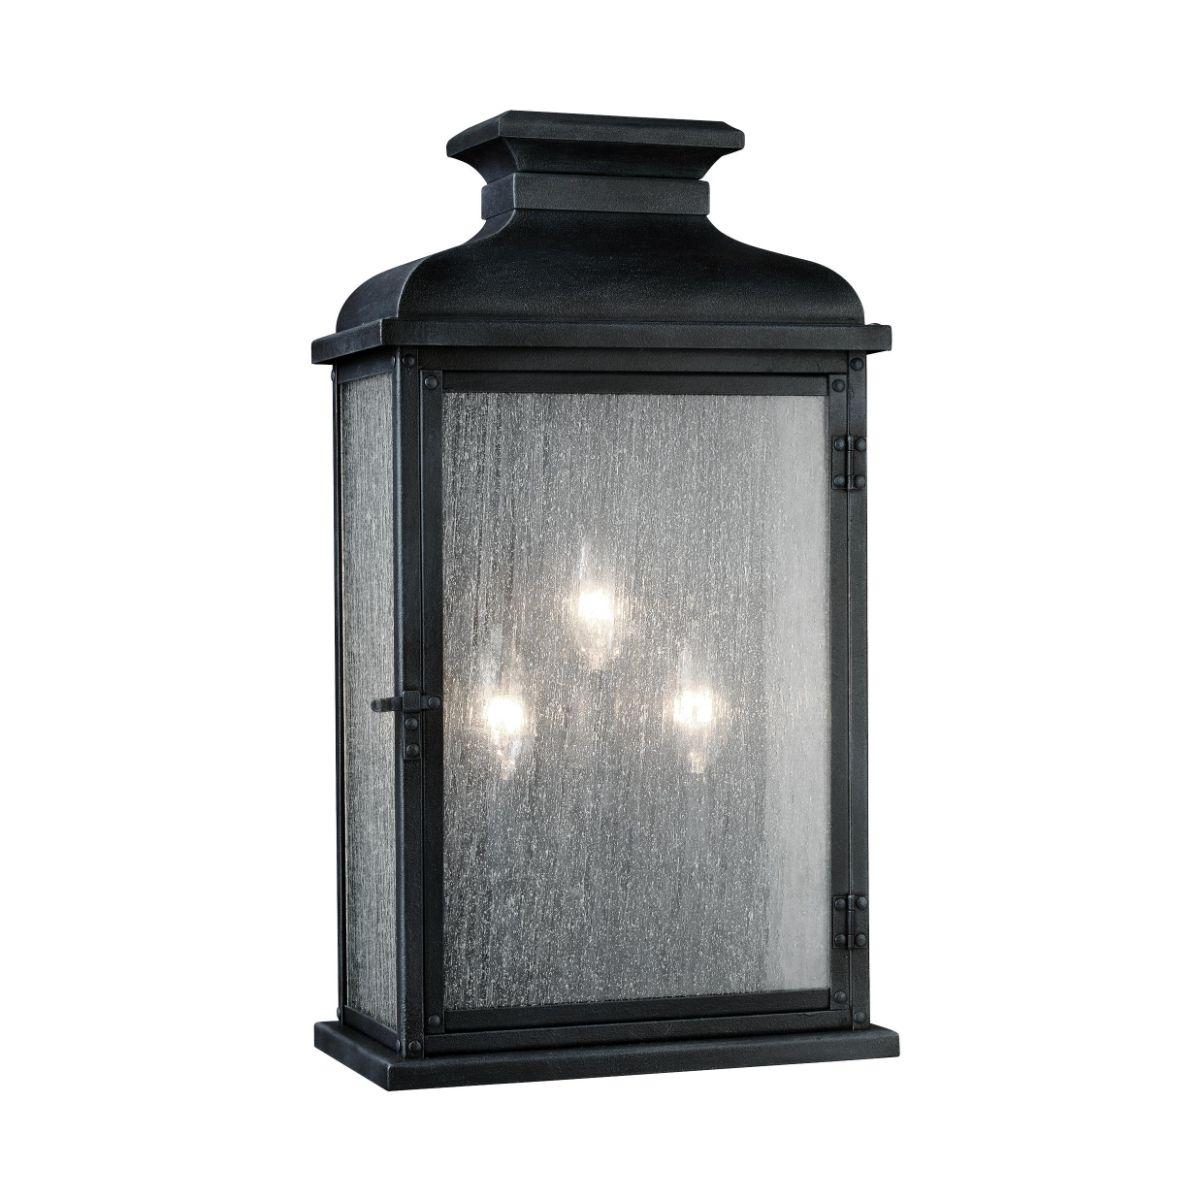 Pediment 18 In. 3 Lights Outdoor Wall Sconce Black Finish